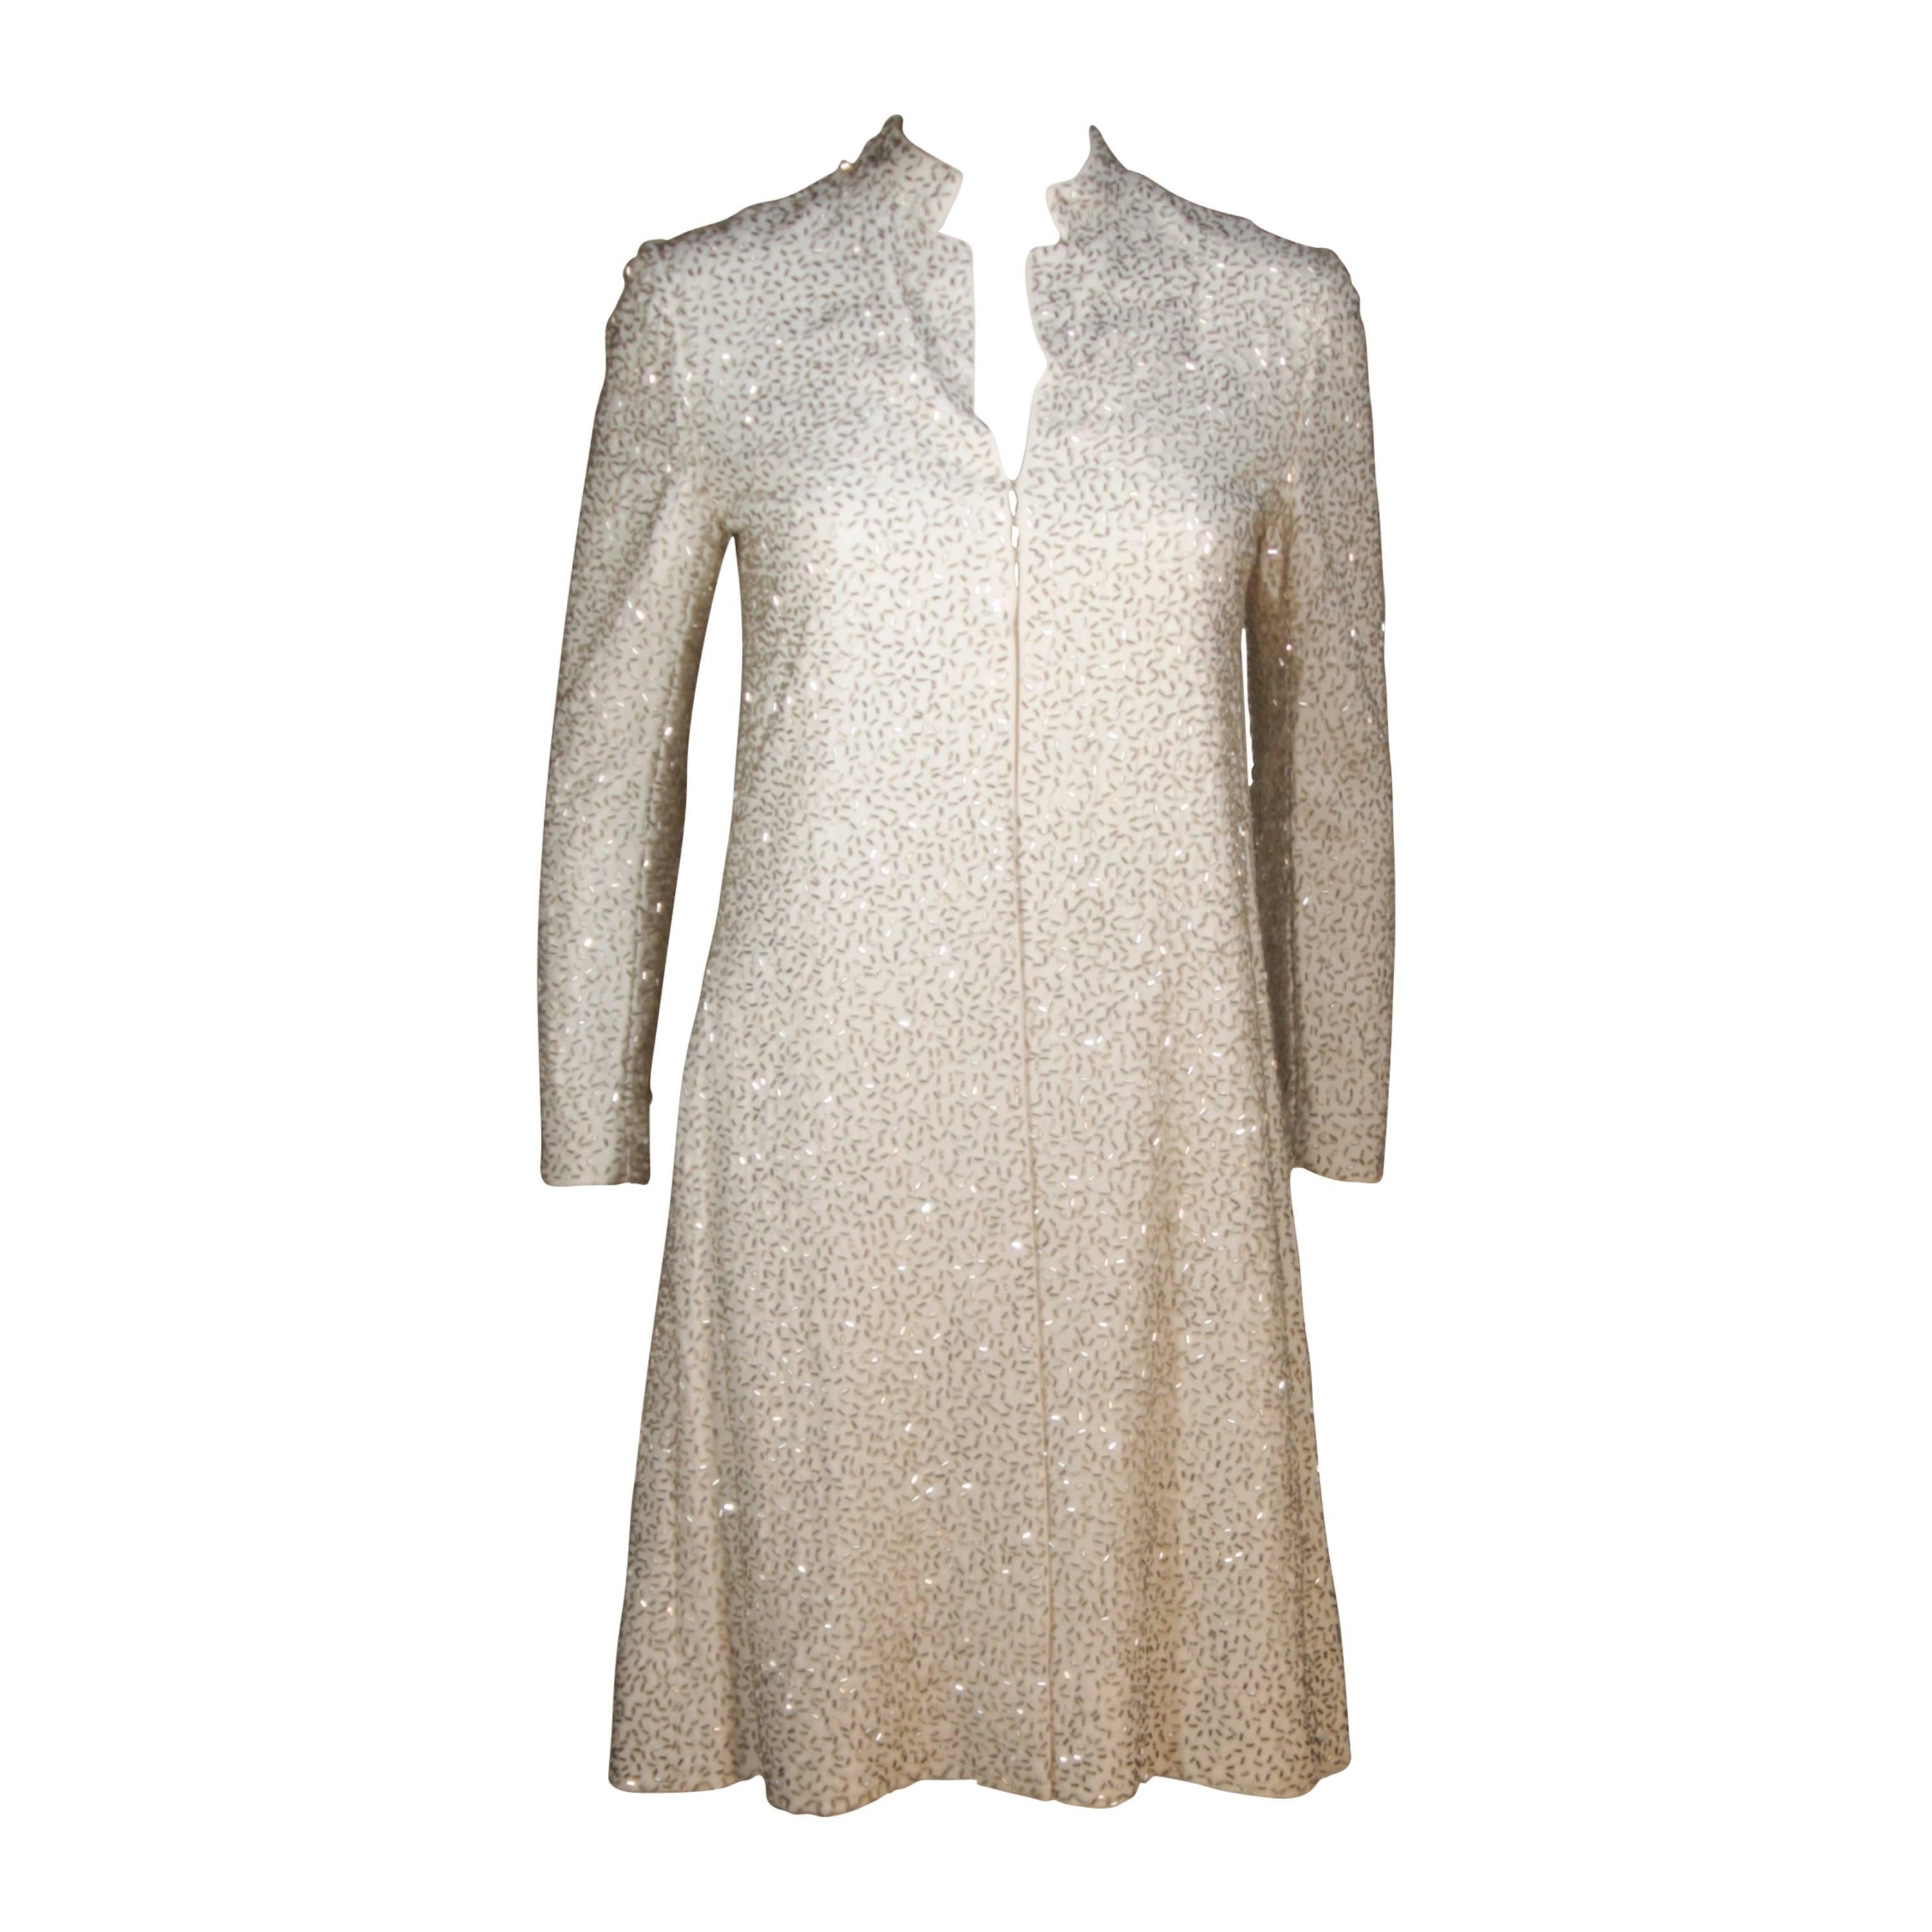 Vintage Off-White Silk Coat with Silver Beading Size 4-6 For Sale